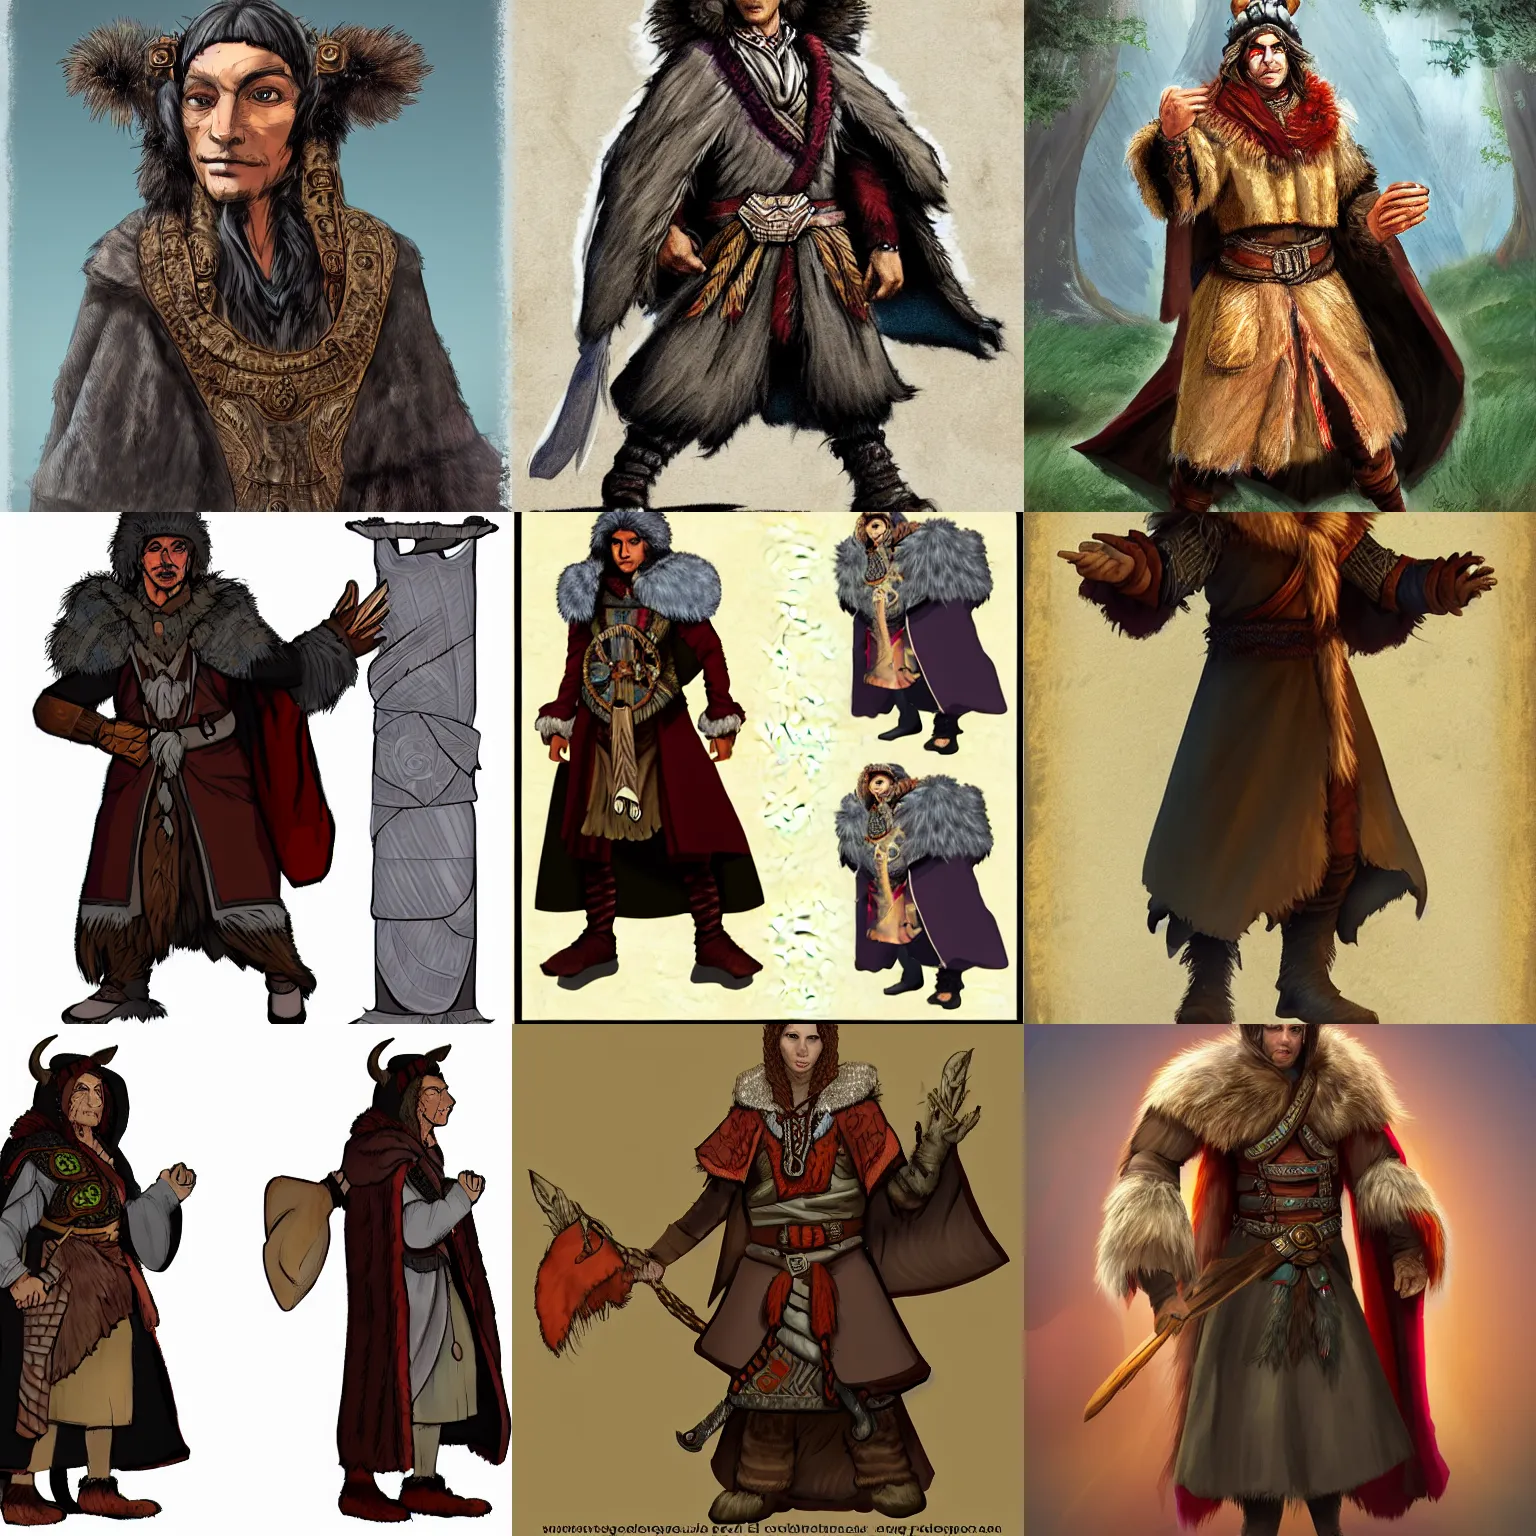 Prompt: character portrait of a shaman wearing a bearskin cloak and travel clothes. D&D character art.